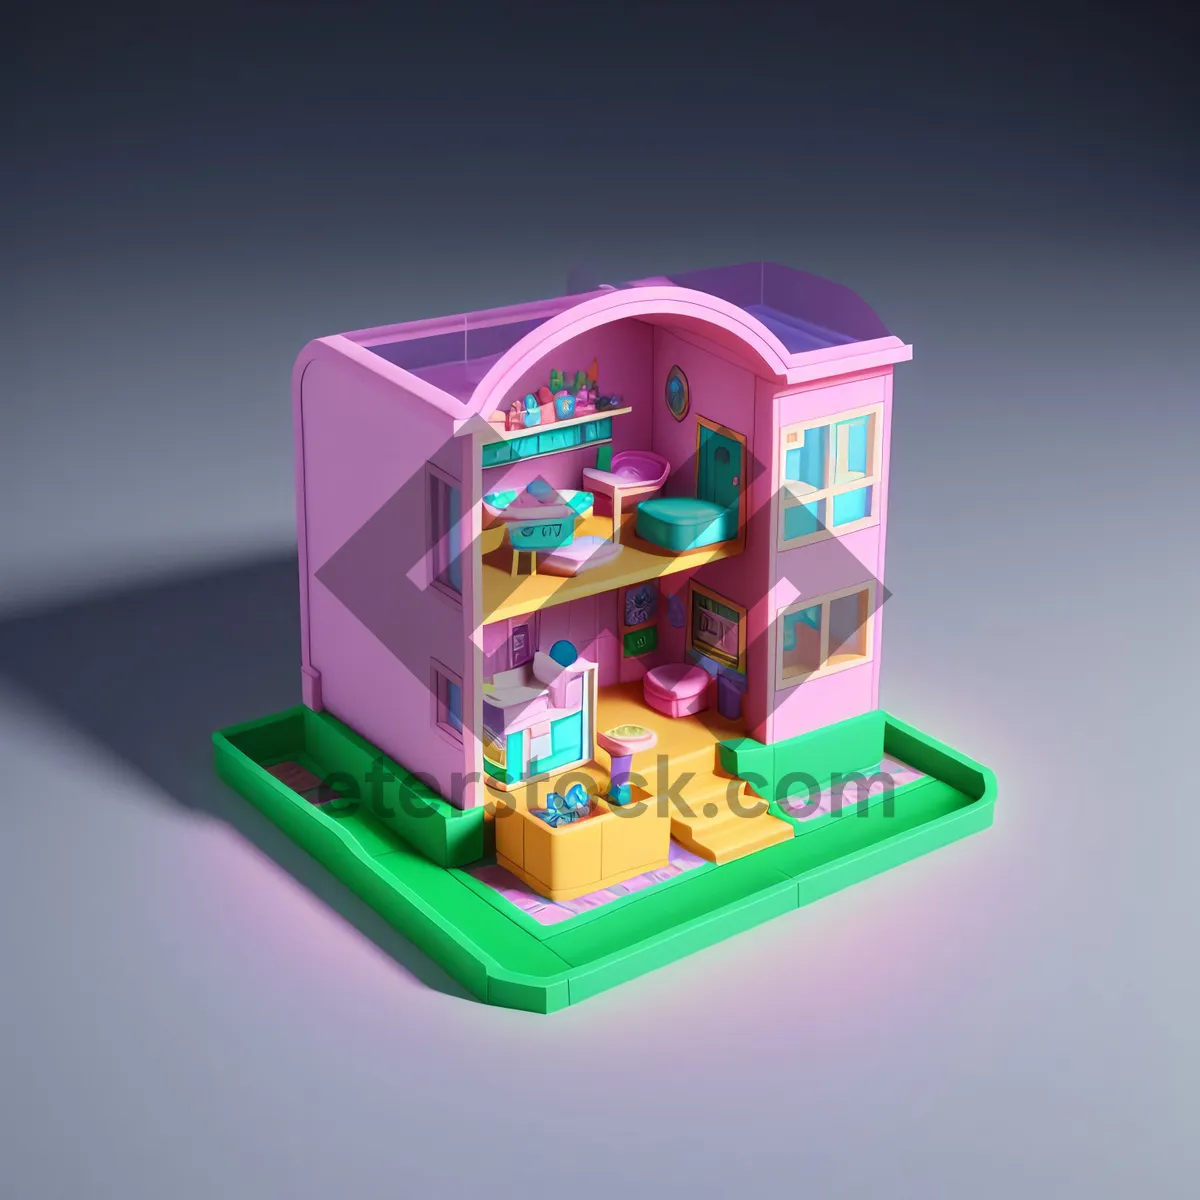 Picture of 3D Toy House in Playful Resort Area